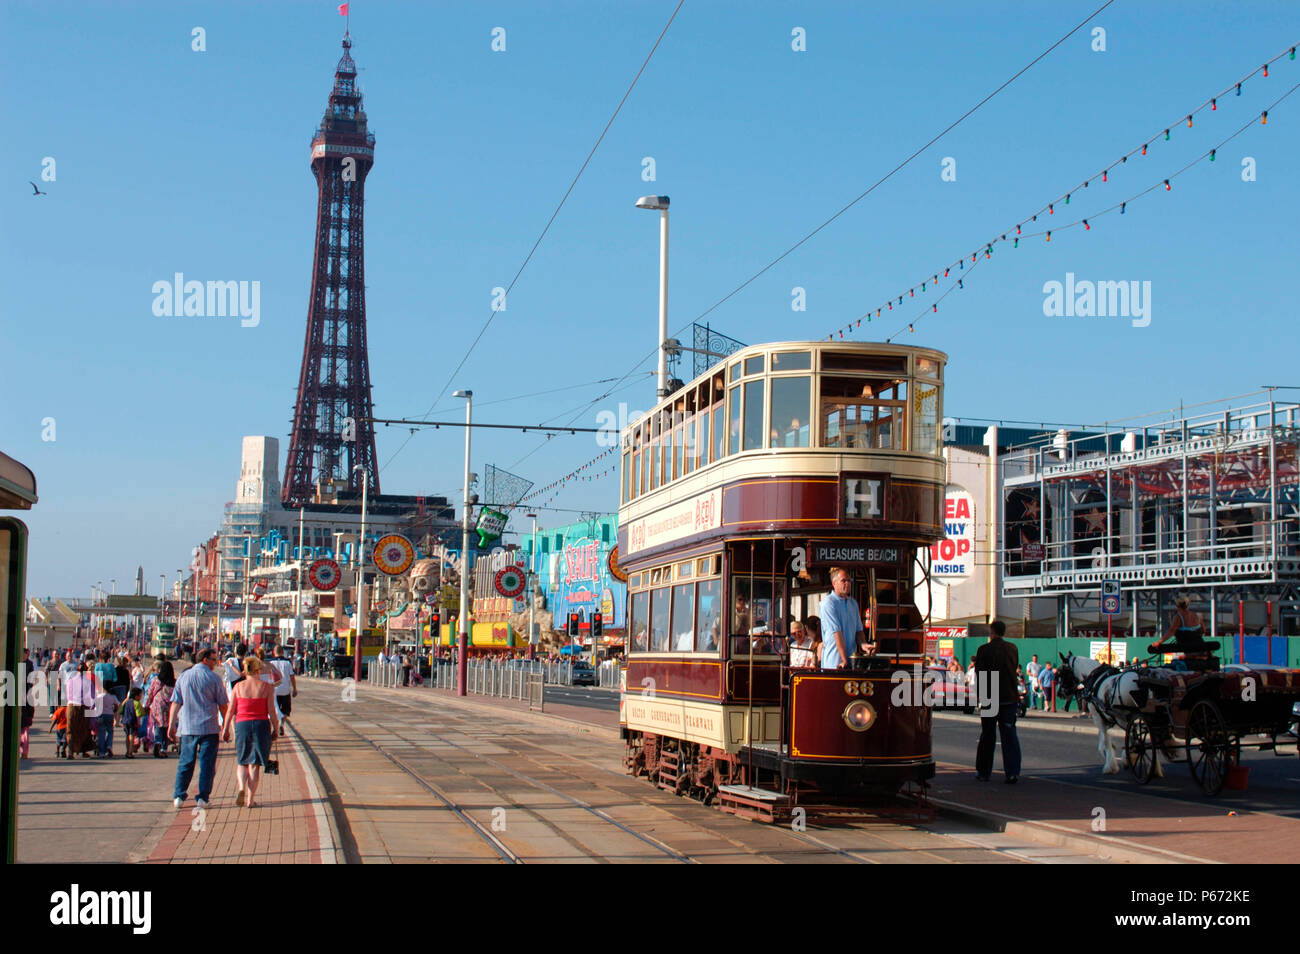 A typical scene on Blackpool seafront as one of the resort's heritage trams traverses the promenade with the famous Blackpool Tower in the background. Stock Photo